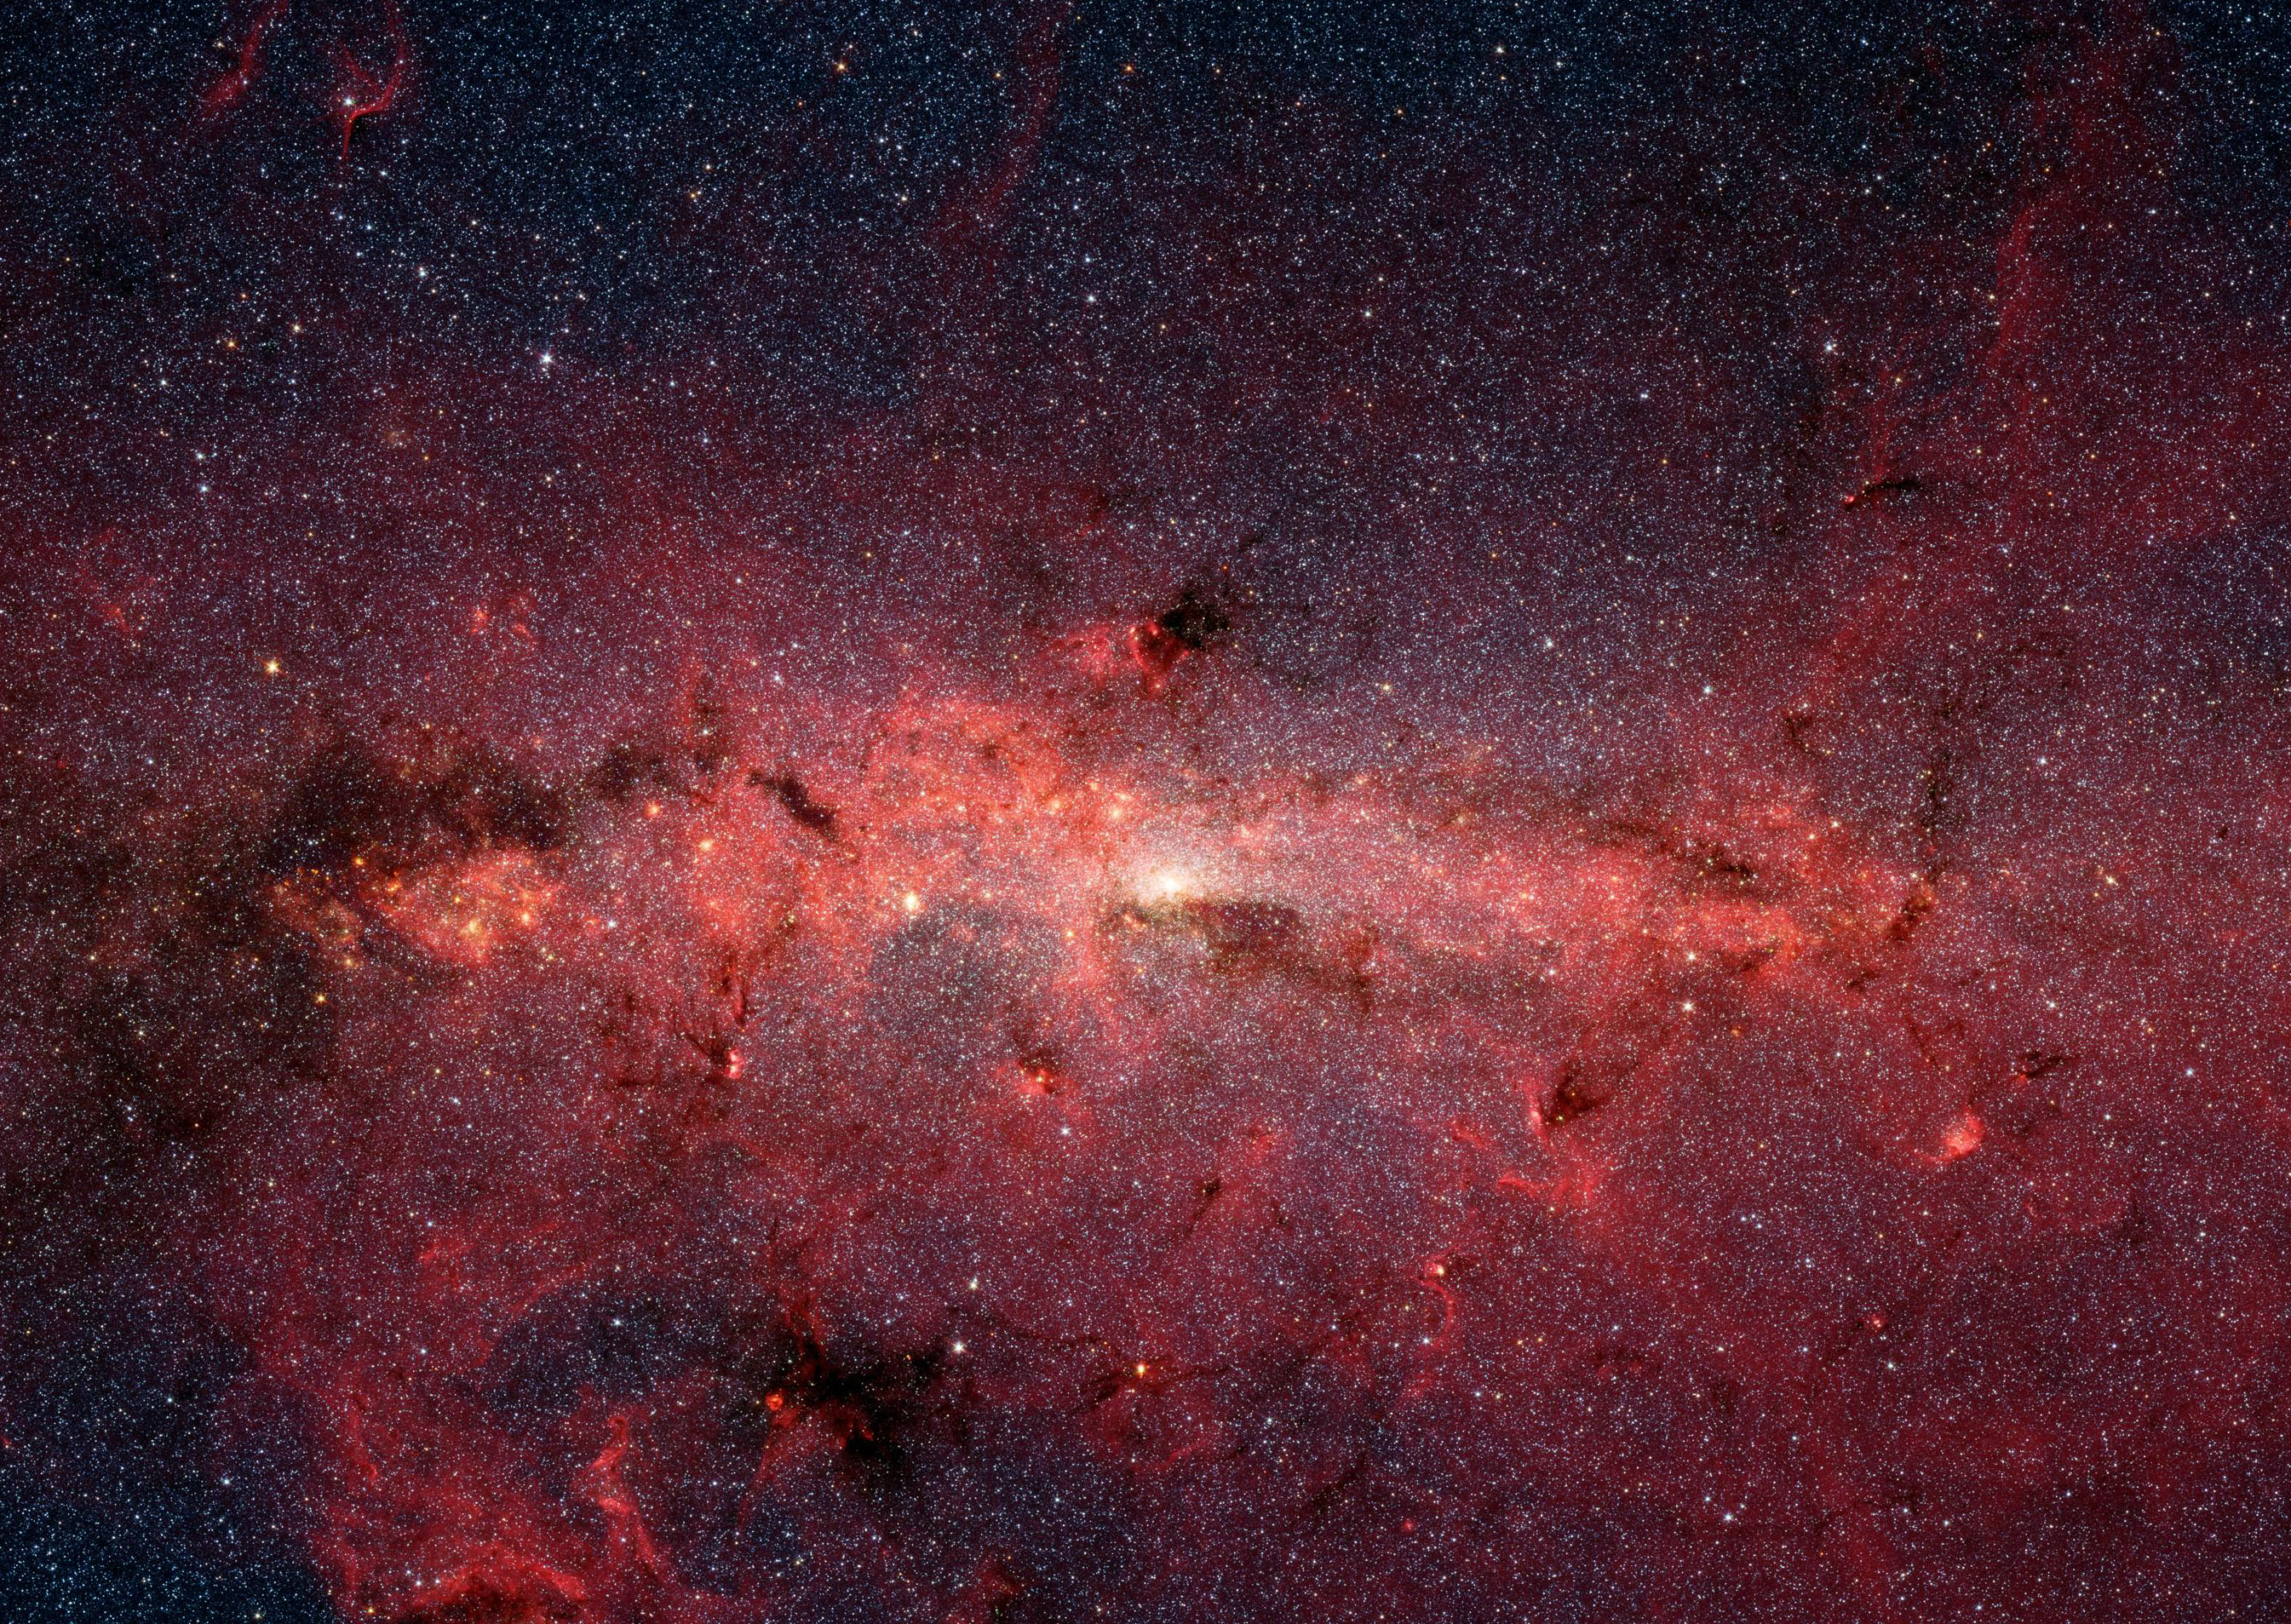 Revealing the Milky Way's Center